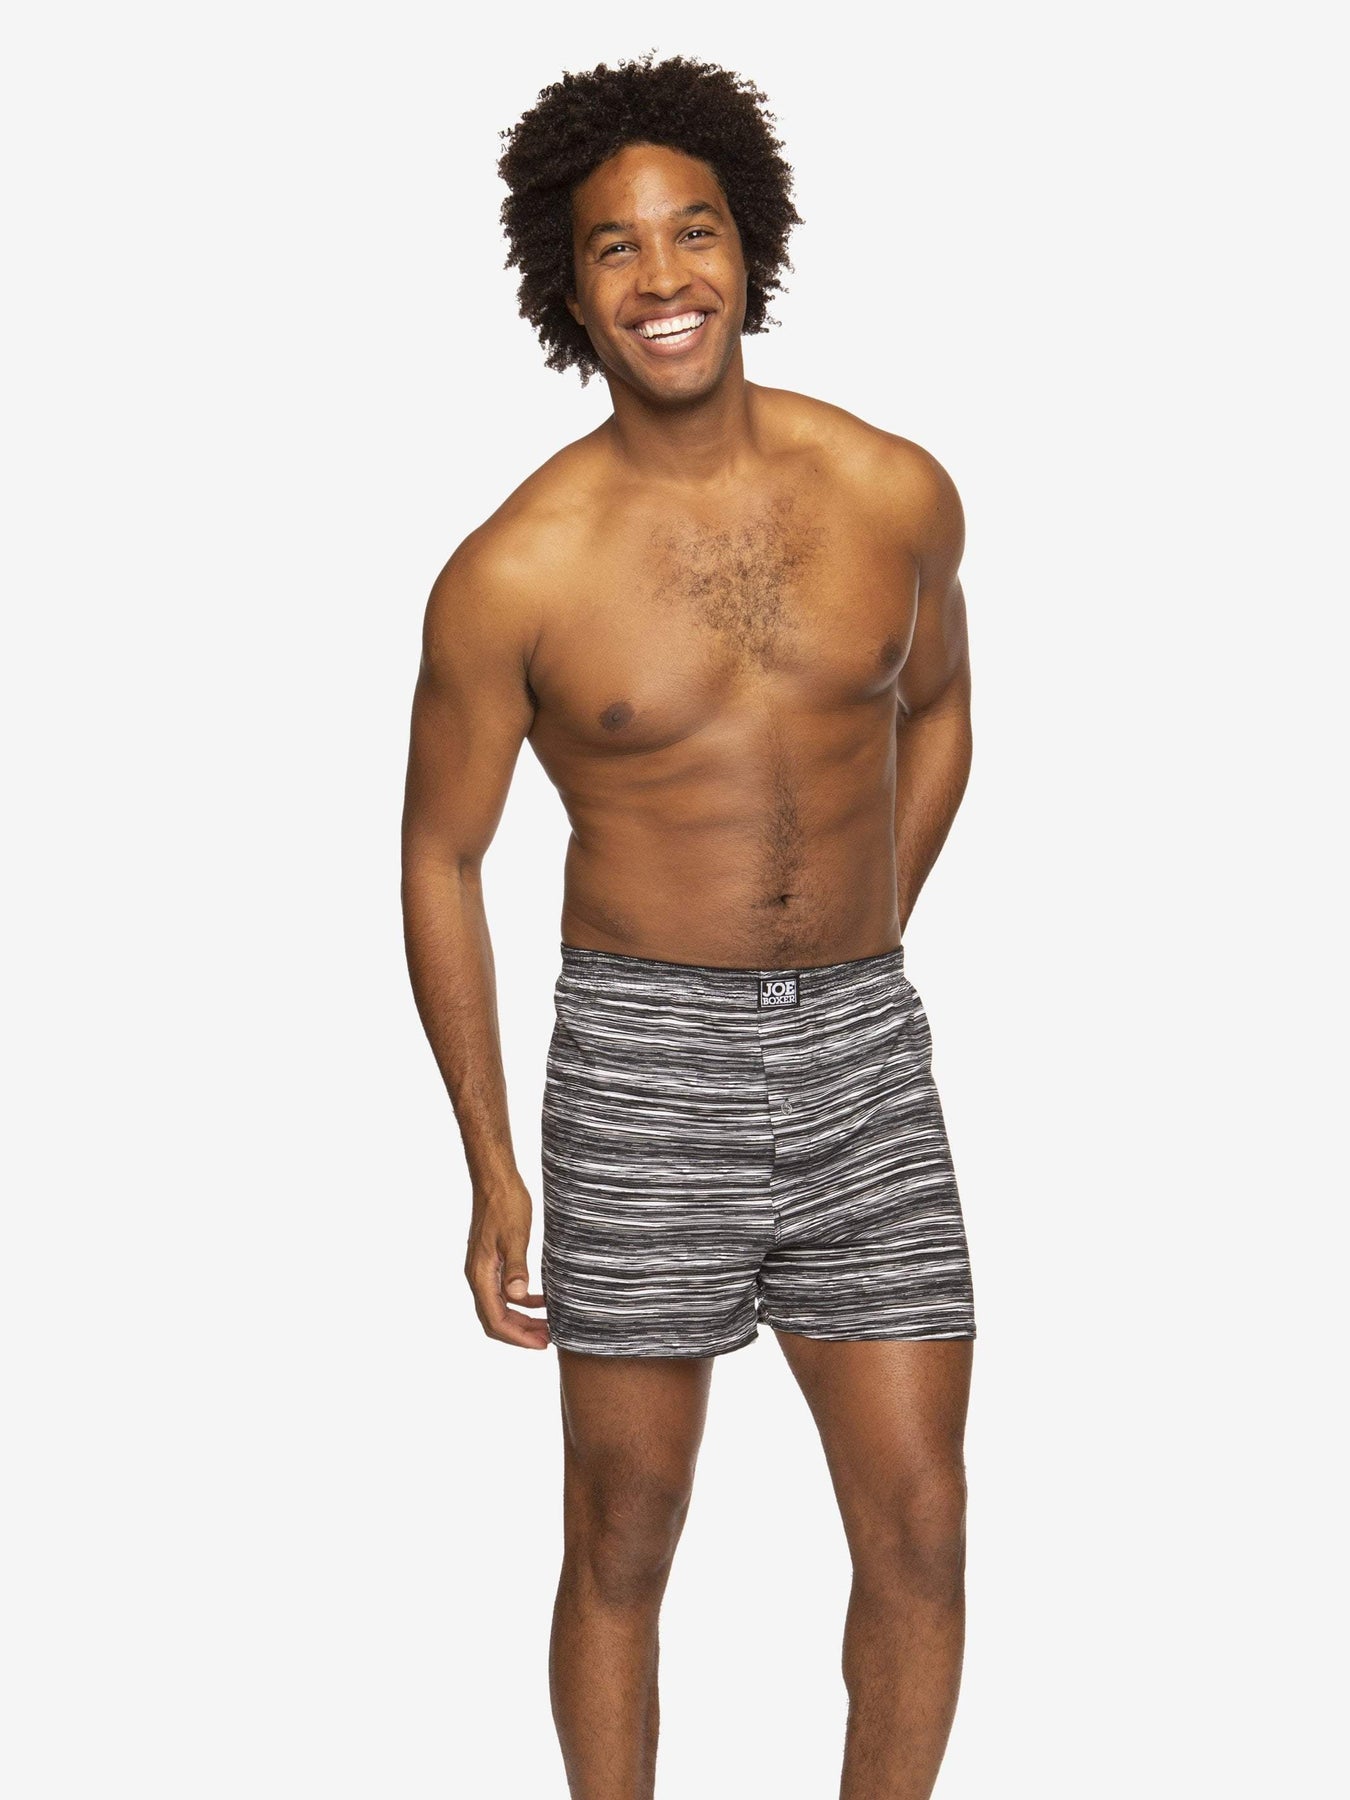 Basic Outfitters on X: Our Limited Edition Reebok boxer briefs